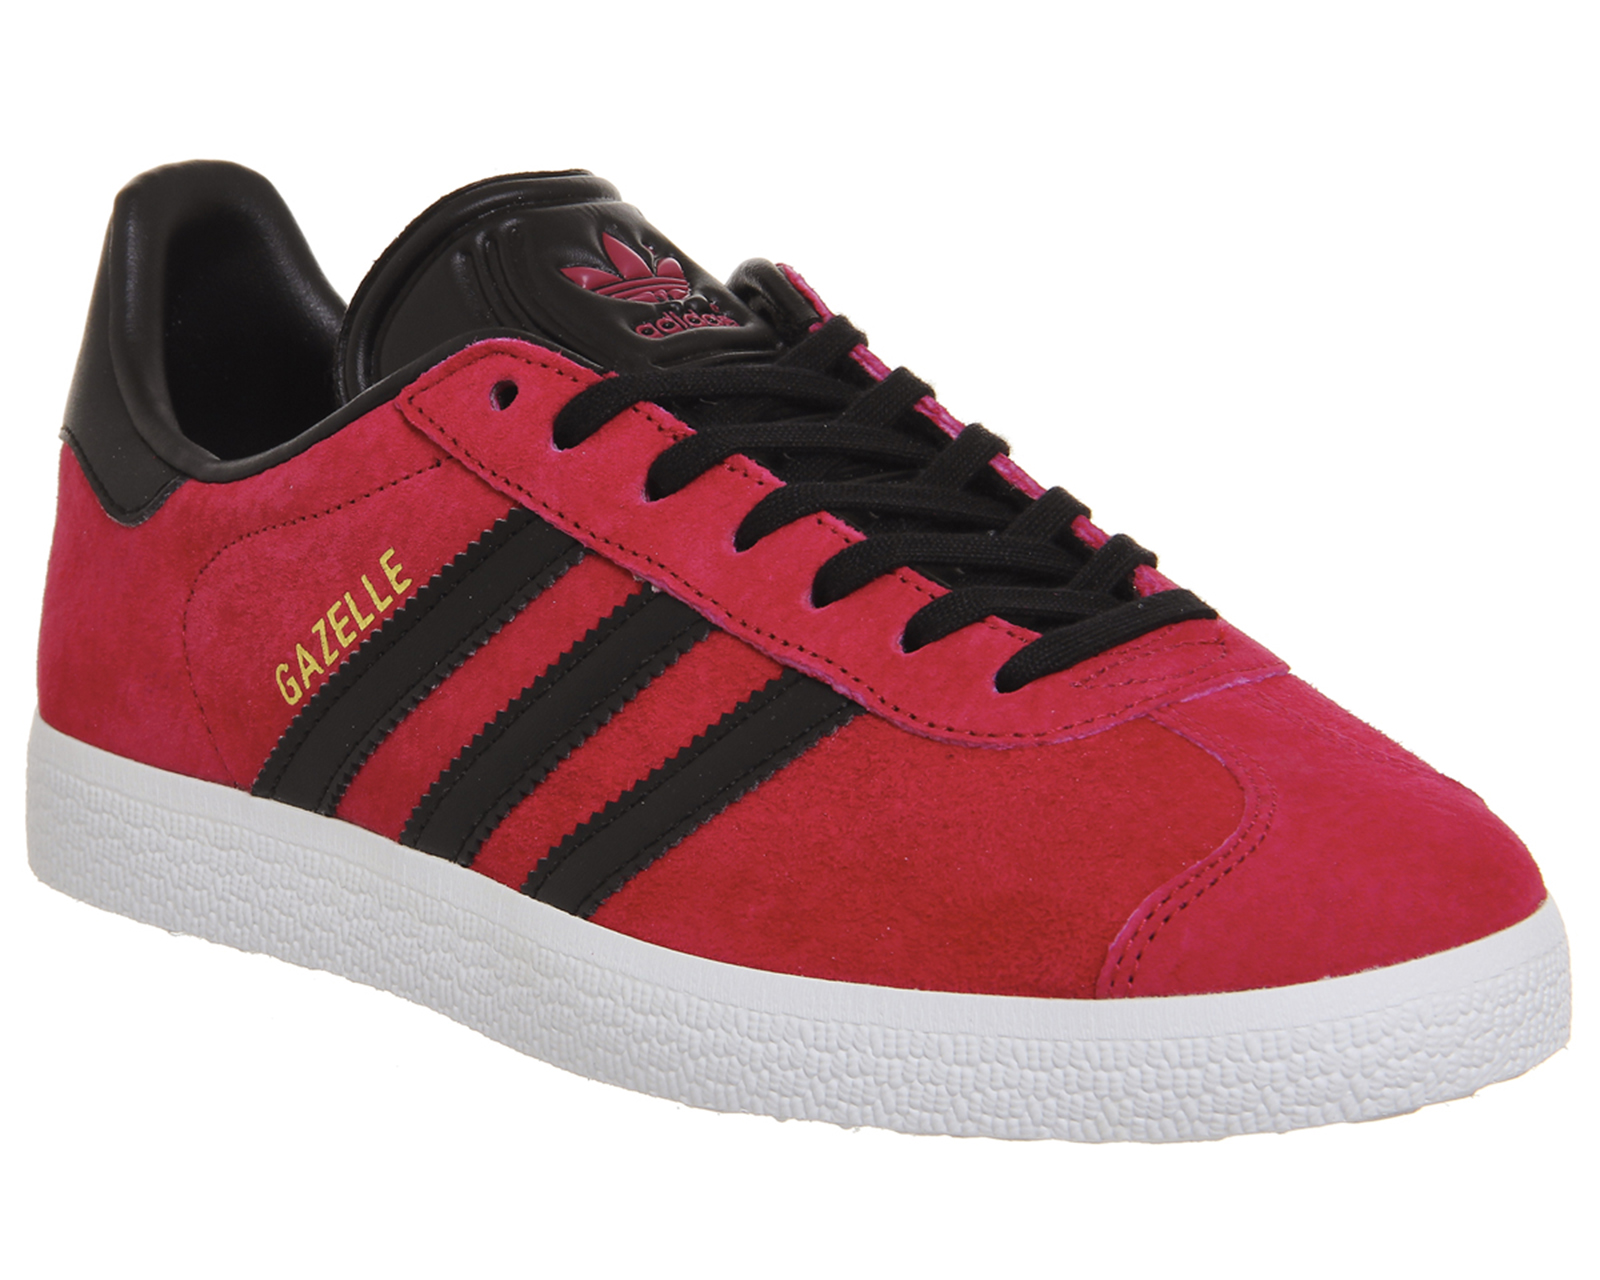 adidas trainers black and pink